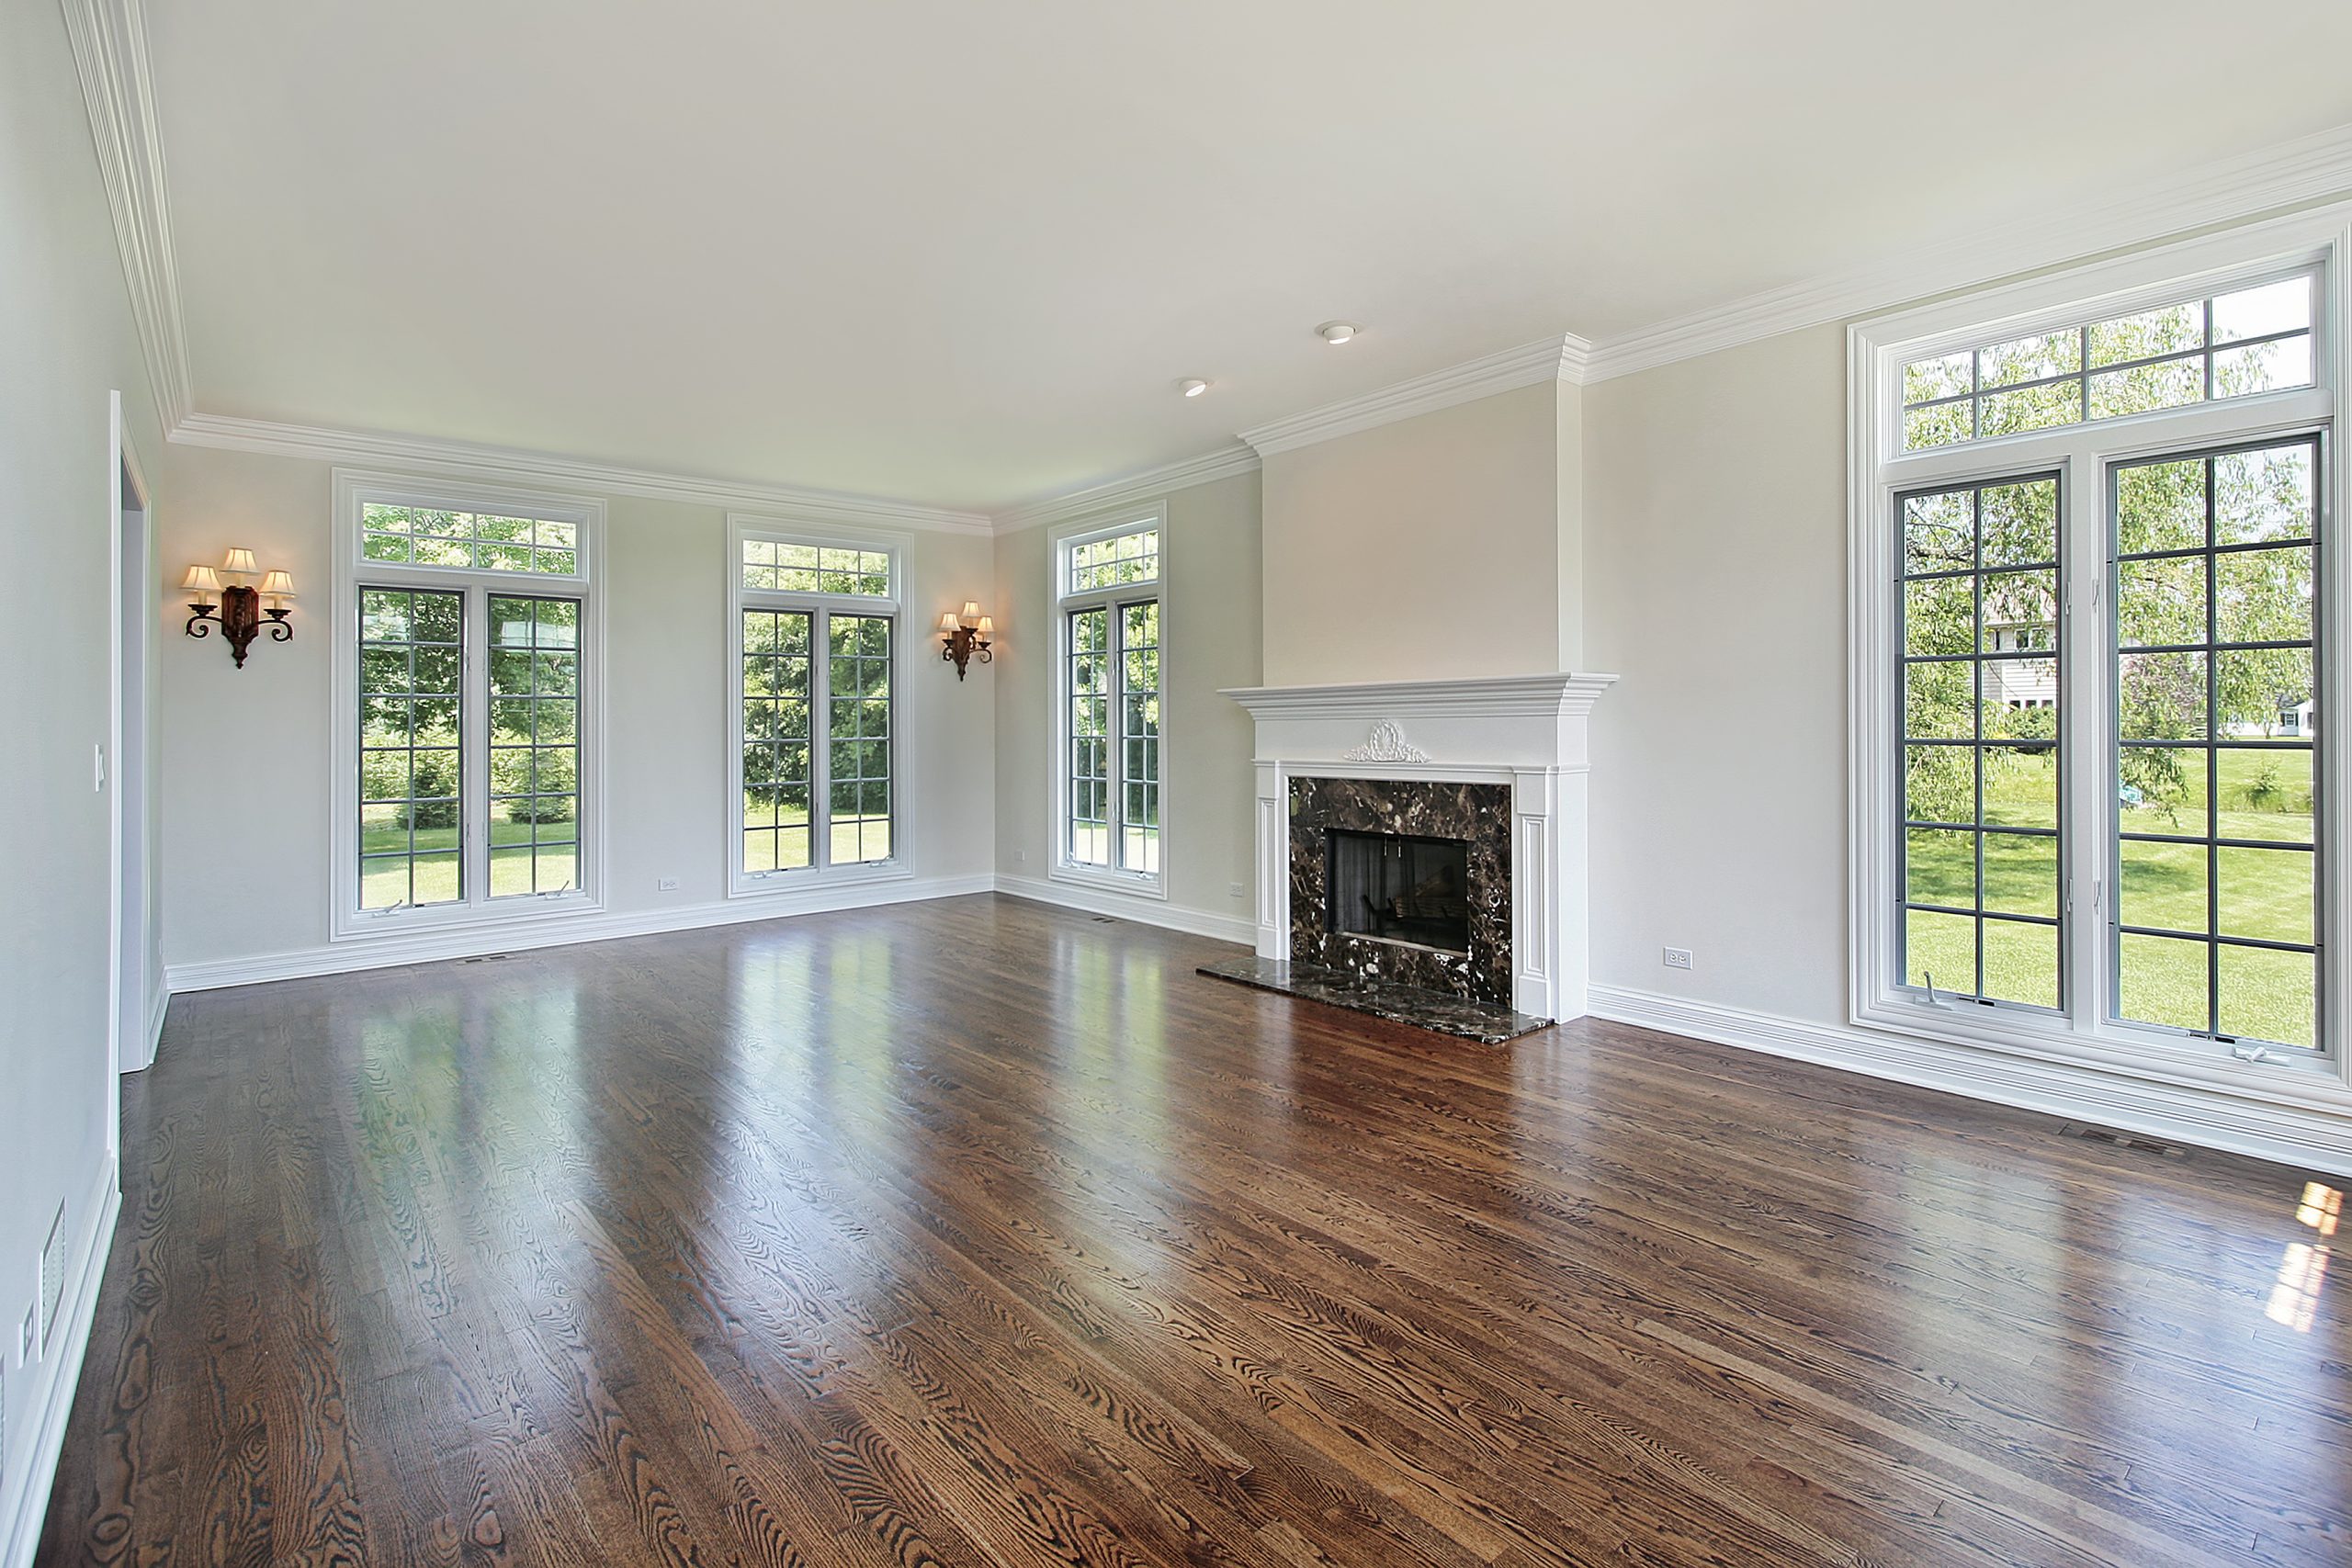 Diffe Types Of Polyurethane Finishes, Stain And Polyurethane In One For Hardwood Floors